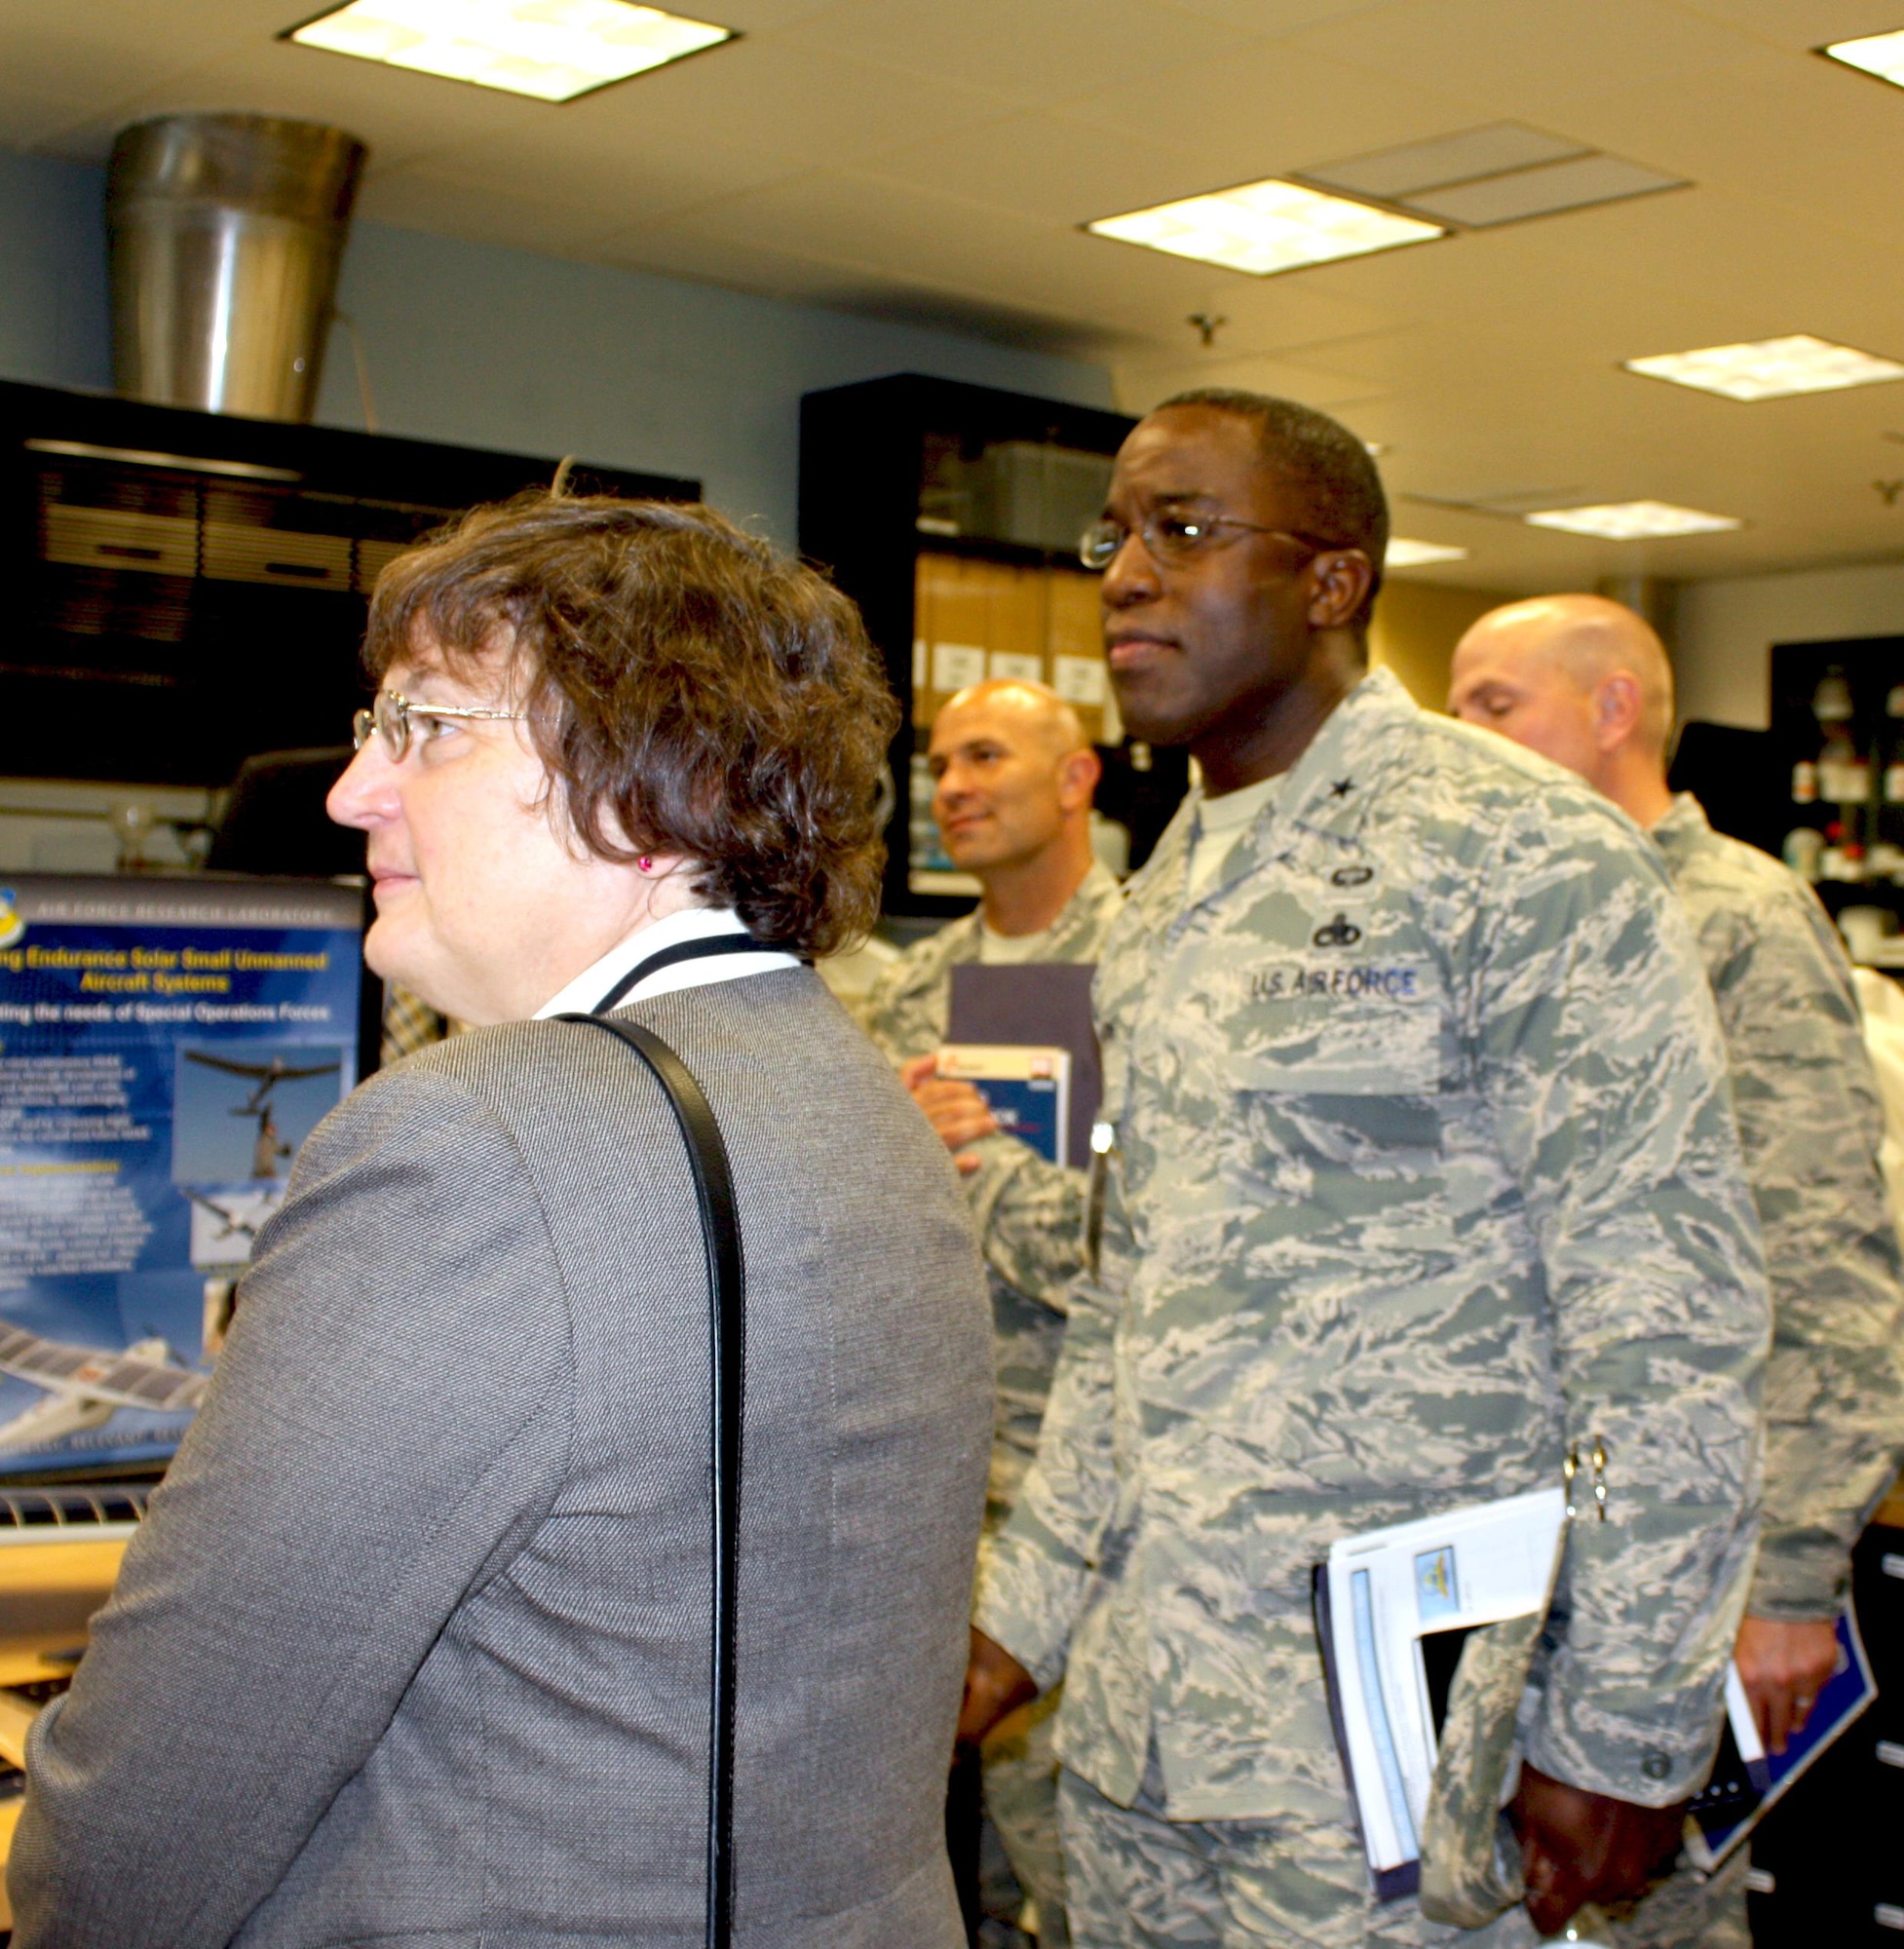 WRIGHT-PATTERSON AIR FORCE BASE, Ohio – Brig. Gen. Stacey T. Hawkins, Director, Logistcs, Engineering and Force Protection, Air Mobility Command (right) and Dr. Donna C. Senft, Chief Scientist, Air Mobility Command, along with core members of the AMC aircraft maintenance team visited the Materials and Manufacturing Directorate, Air Force Research Laboratory, to gain in-depth knowledge of additive manufacturing capabilities and technologies, Aug. 26. The visit included a directorate overview, discussions on additive manufacturing applications and visits to multiple research laboratories, highlighting 3-D printing capabilities for metals, polymer-based materials and functional material applications. AMC is exploring the possibilities of using additive manufacturing for replacement parts for aircraft during the life-cycle maintenance process. (Air Force photo by Marisa Novobilski/released) 